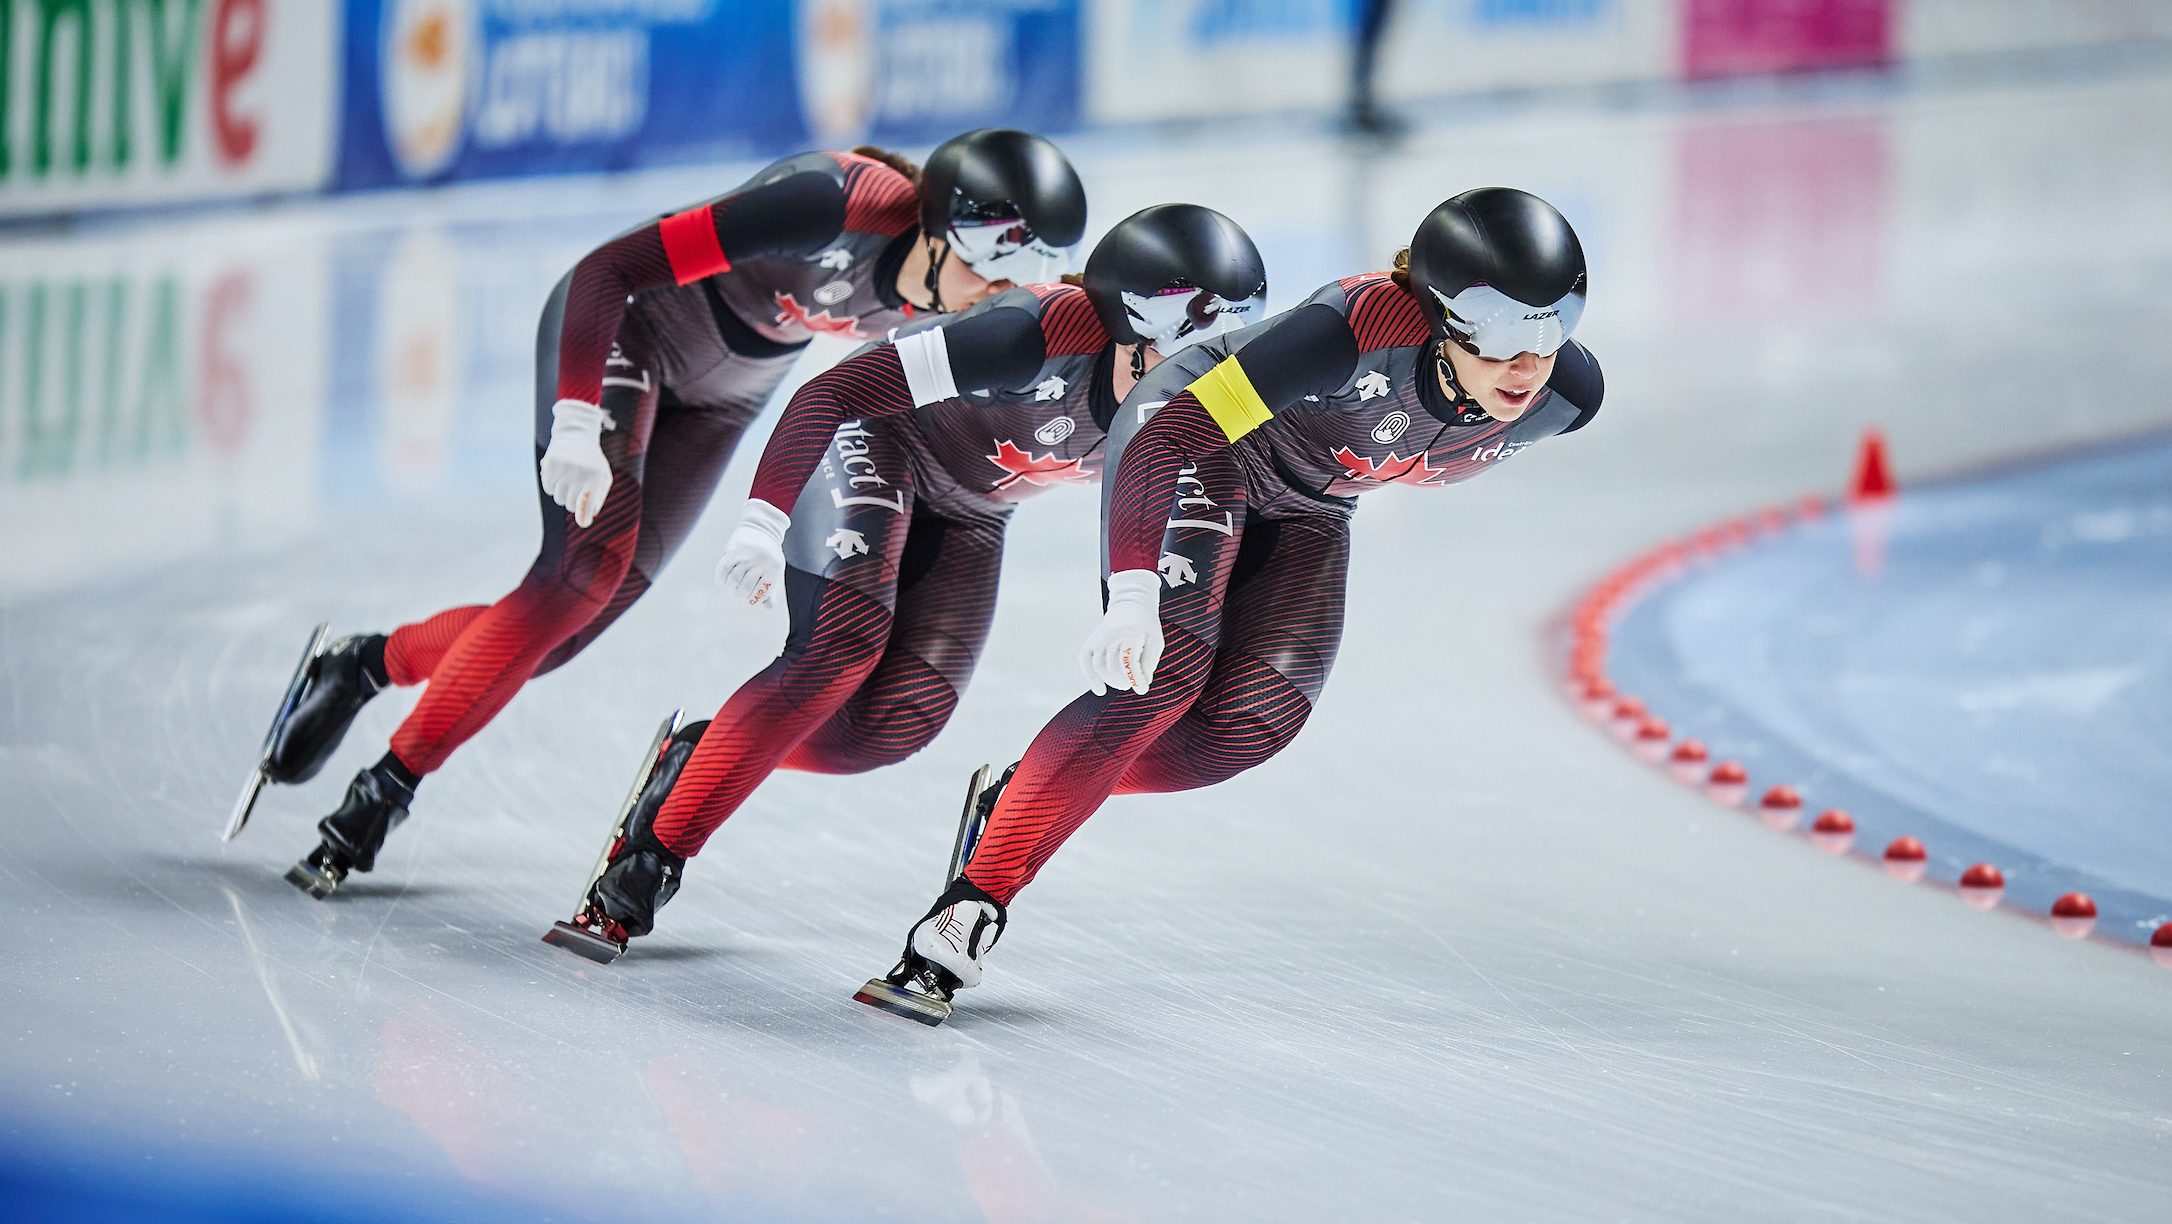 Canada takes gold in team pursuit, Dubreuil adds silver – Team Canada